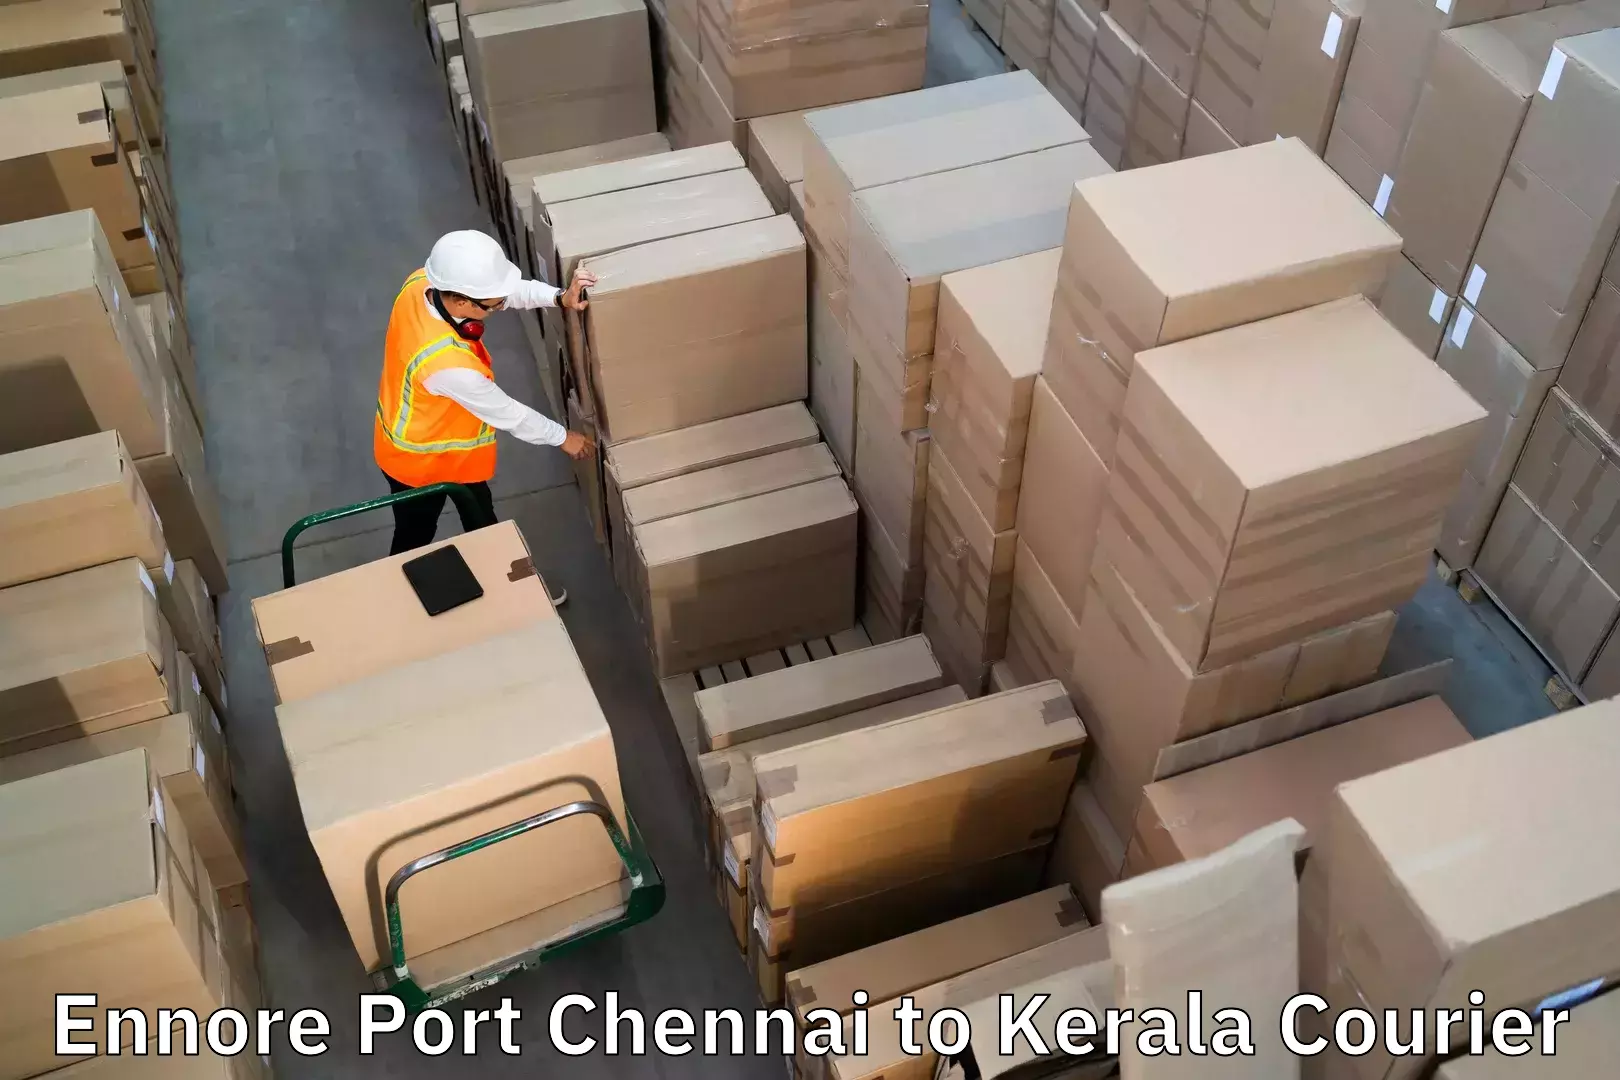 Baggage transport services Ennore Port Chennai to Palakkad